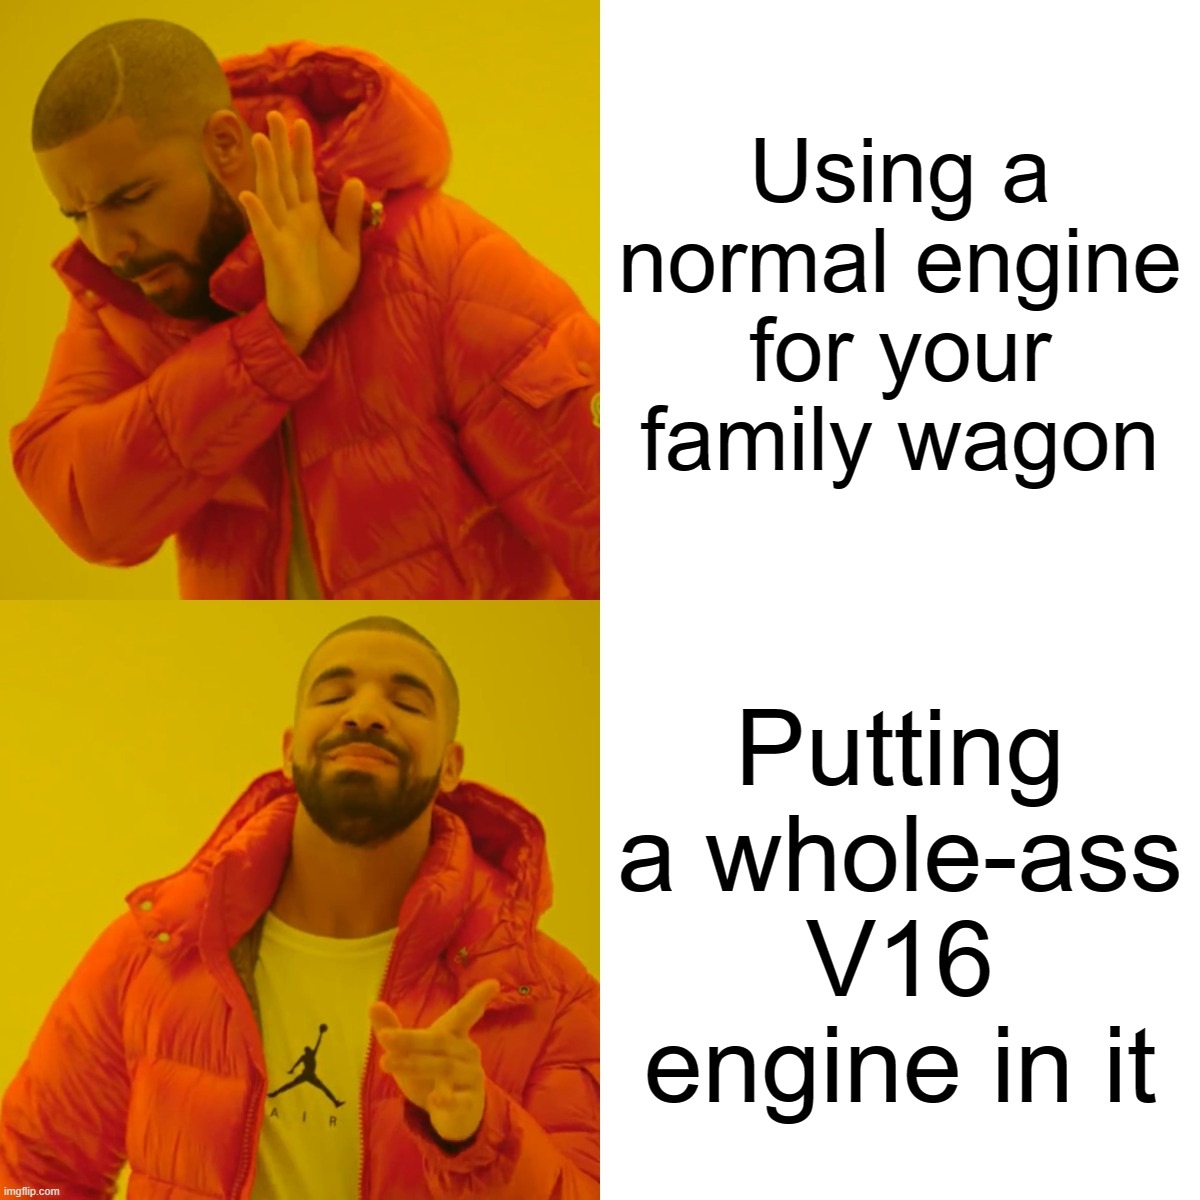 That vehicle was insane as hell though tbh | Using a normal engine for your family wagon; Putting a whole-ass V16 engine in it | image tagged in memes,drake hotline bling | made w/ Imgflip meme maker